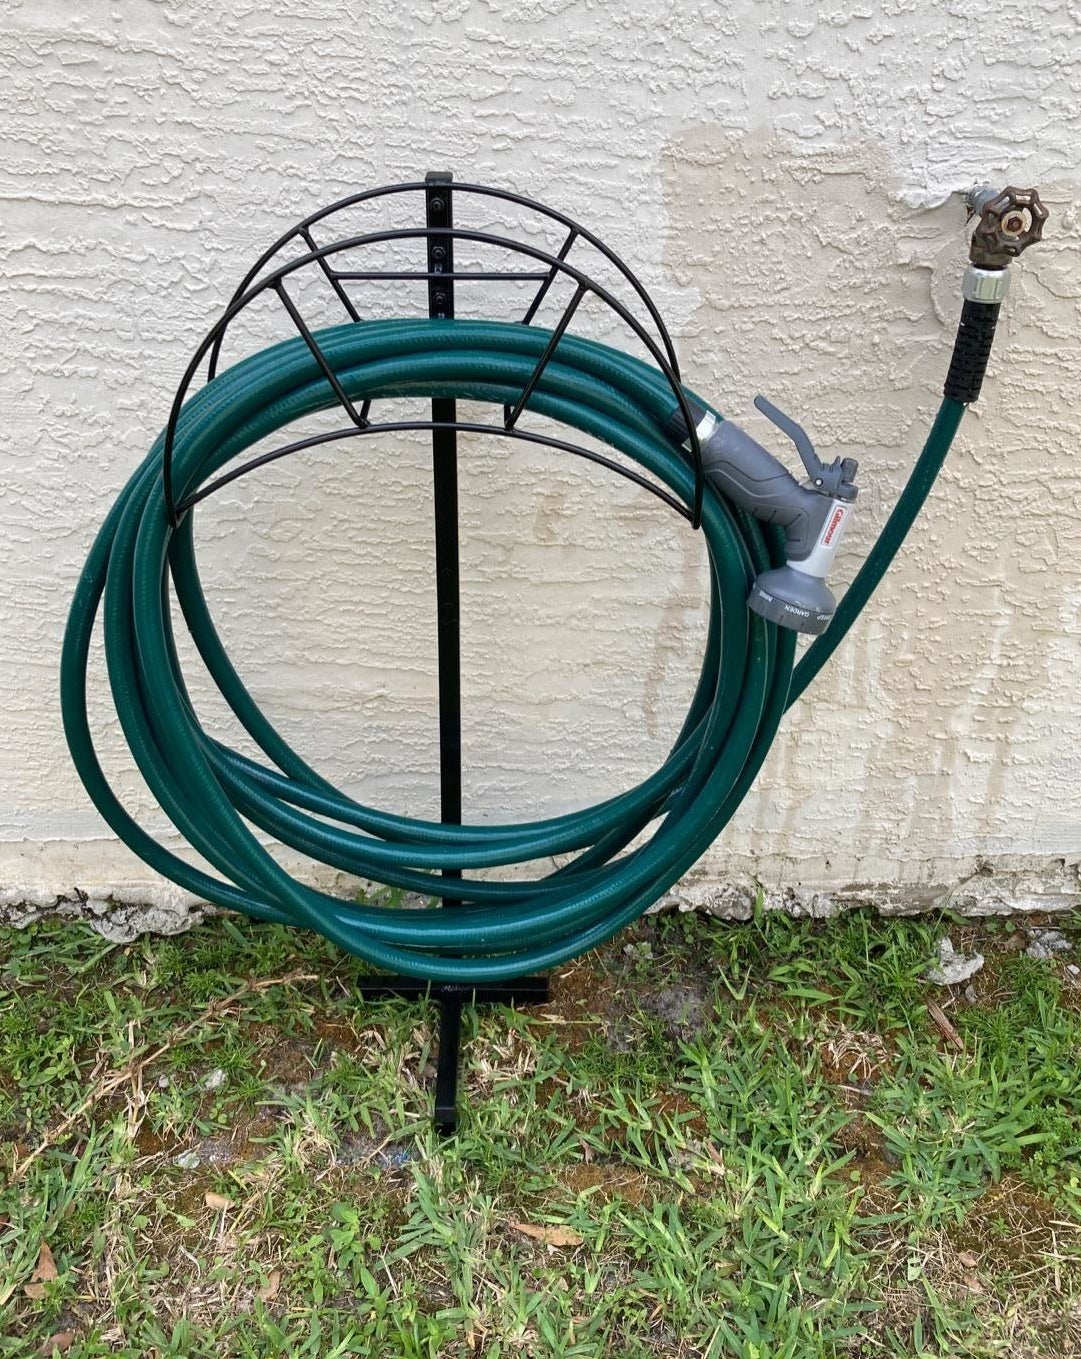 reviewer photo of a hose neatly wrapped around the hose holder